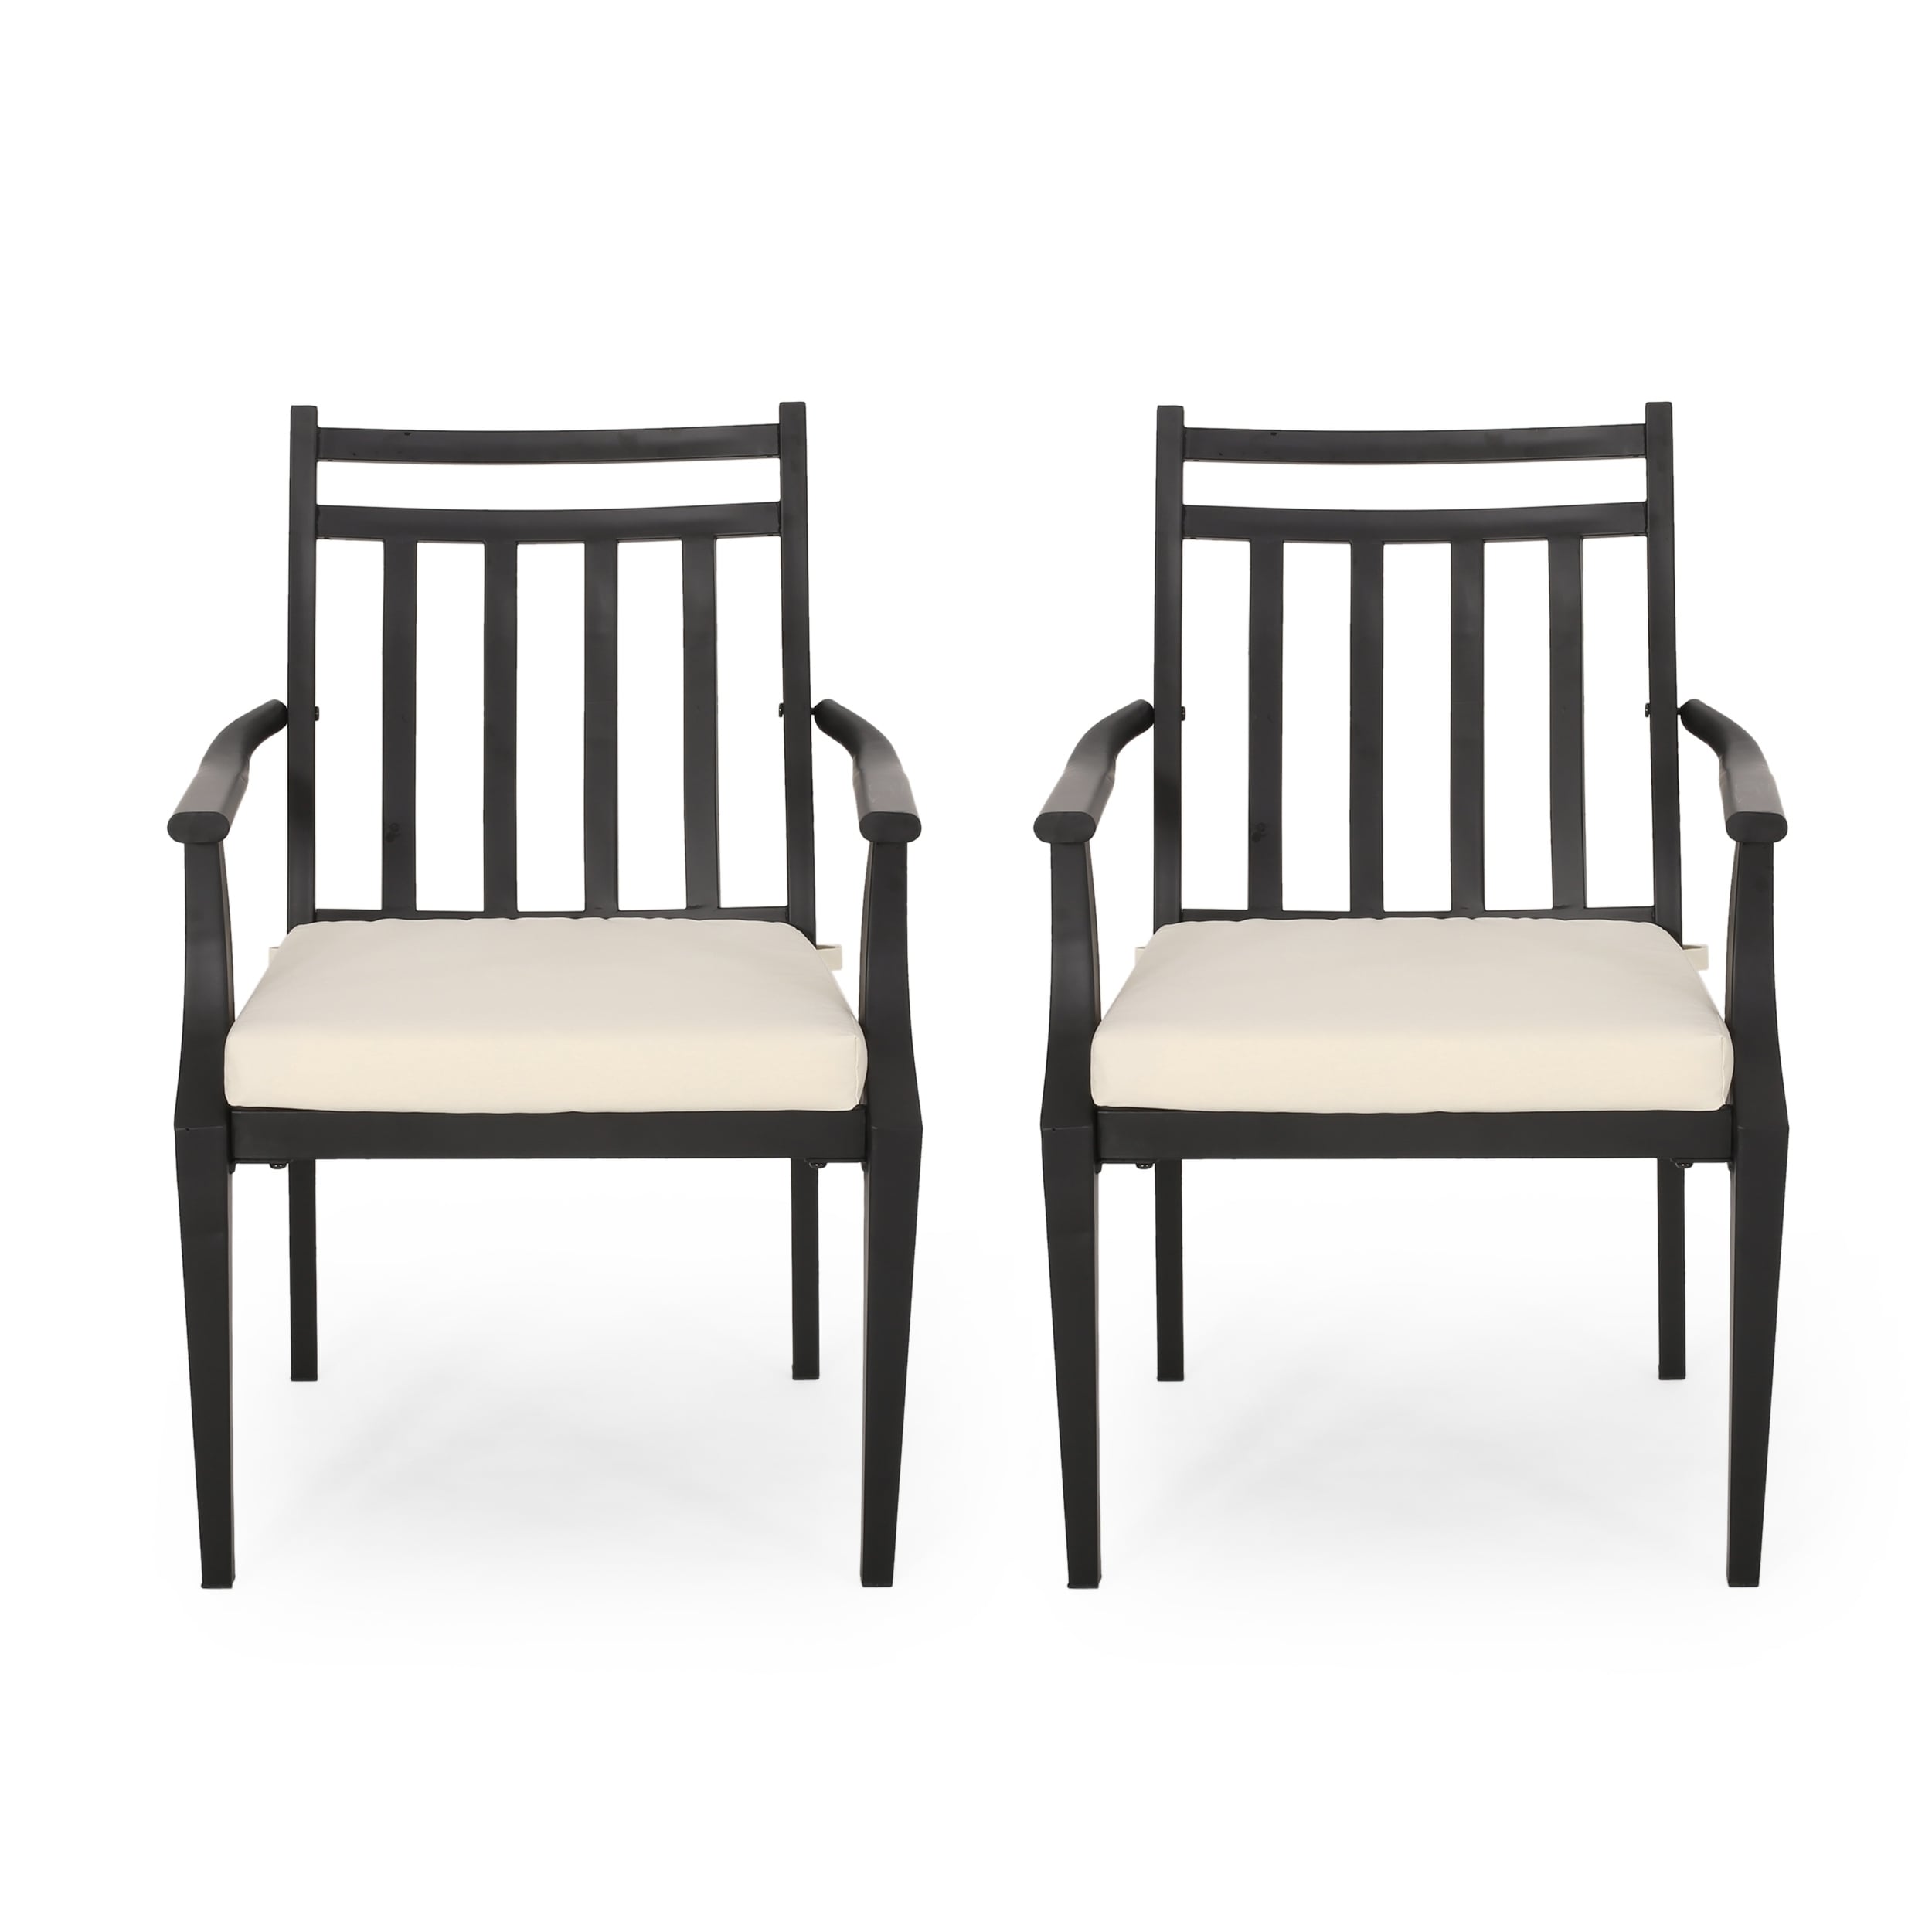 Delmar Outdoor Dining Chair With Cushion (set Of 2) By Christopher Knight Home 26.10" W X 24.50" D X 36.00" H